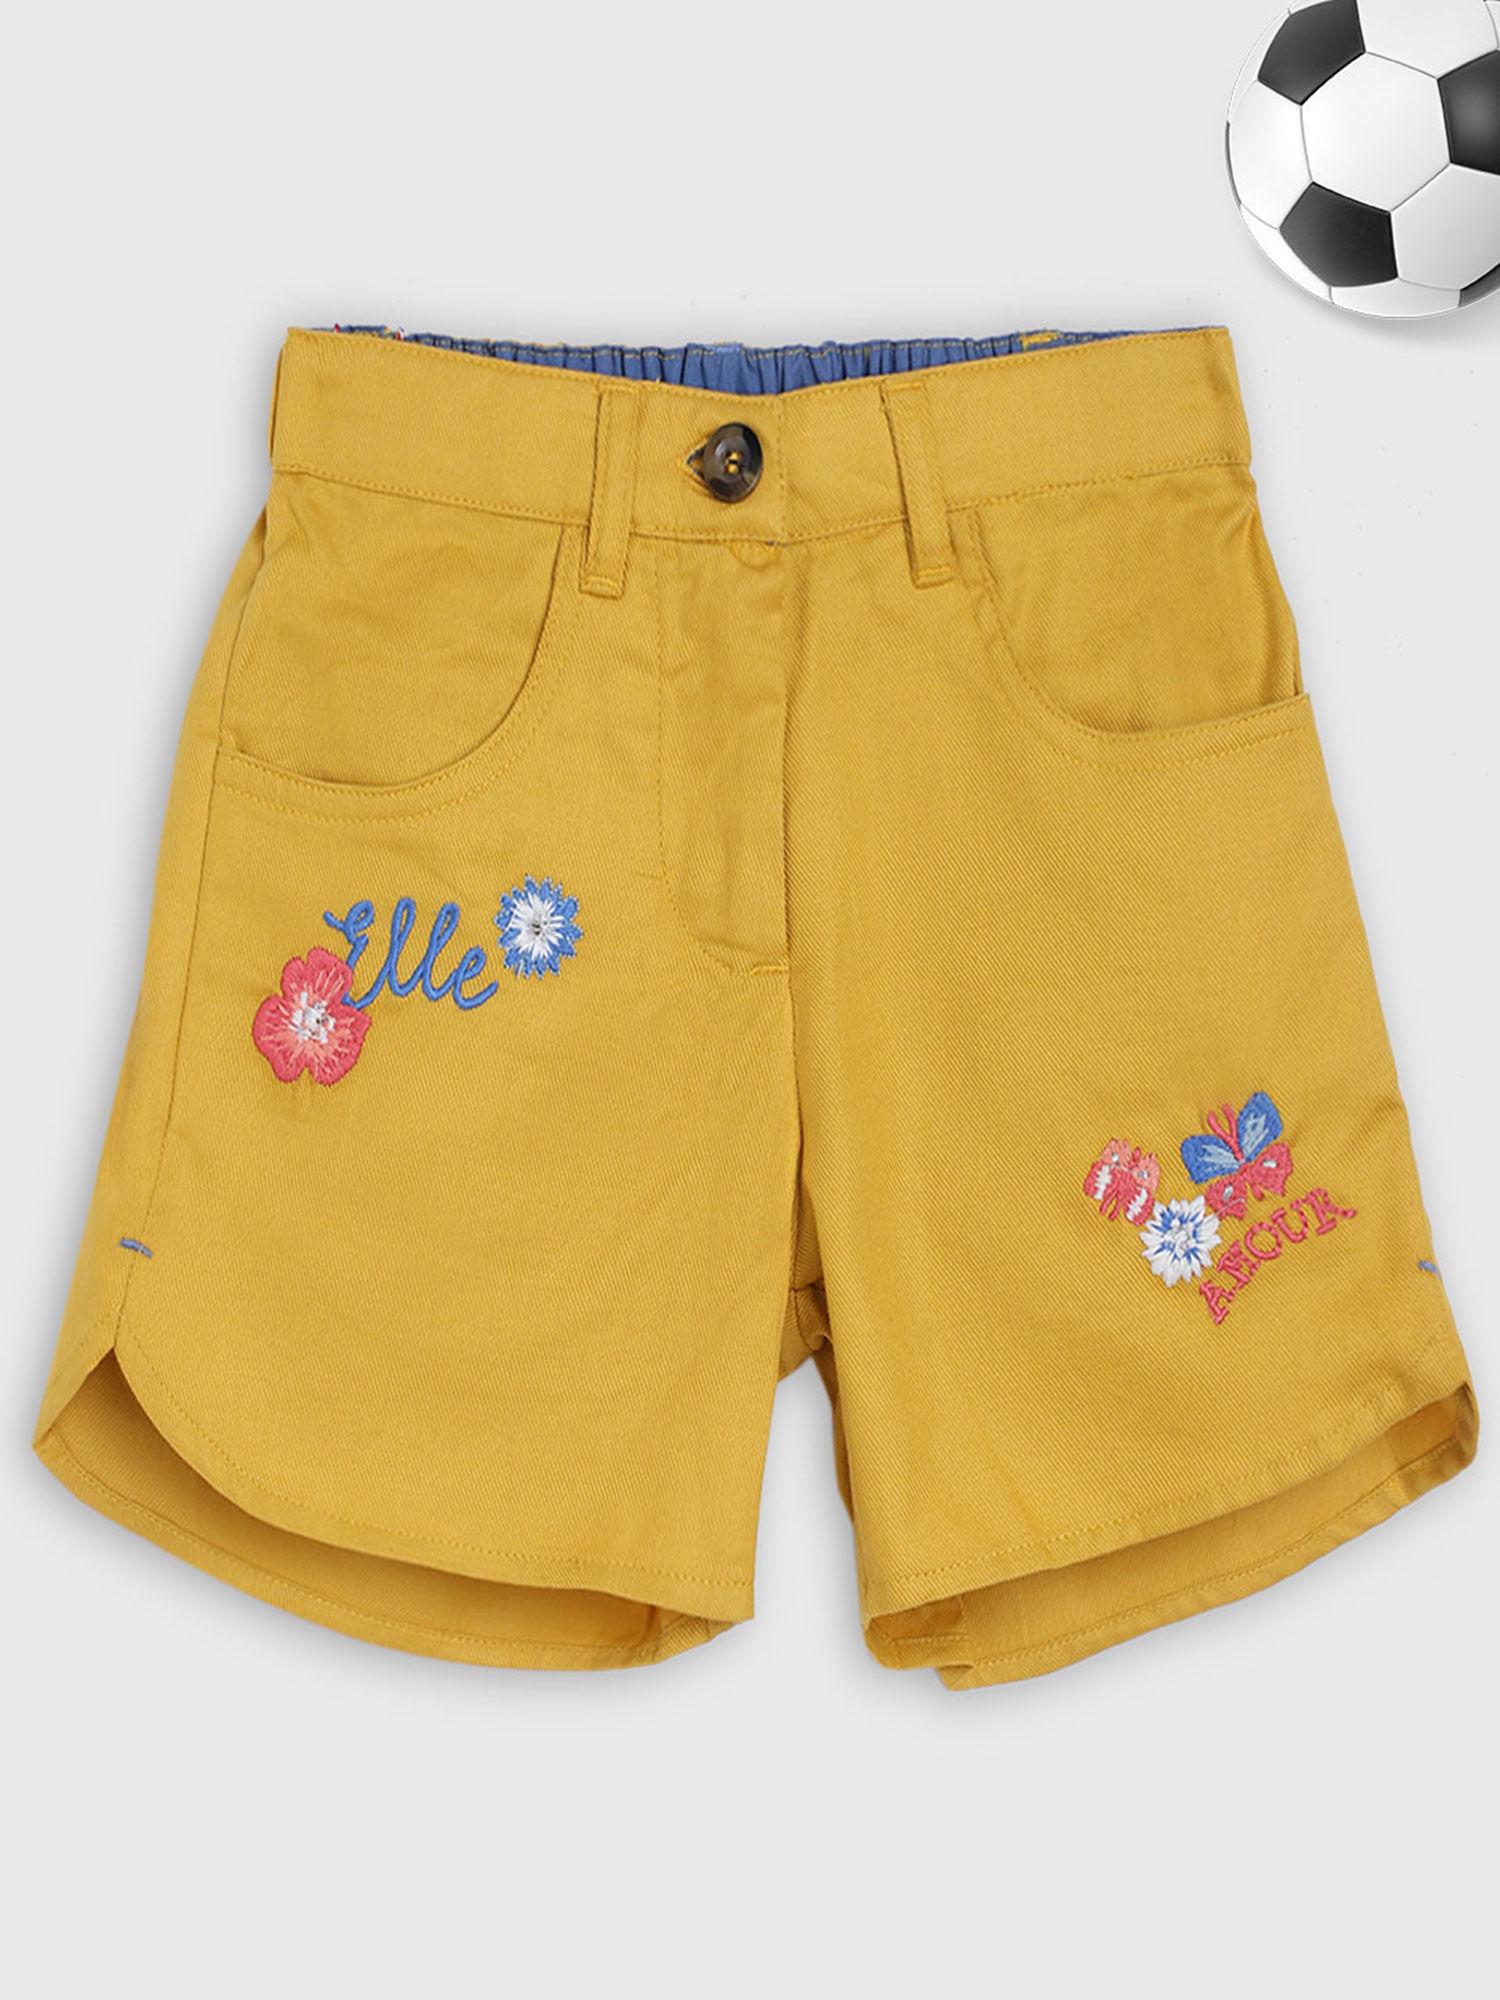 yellow-solid-regular-fit-shorts